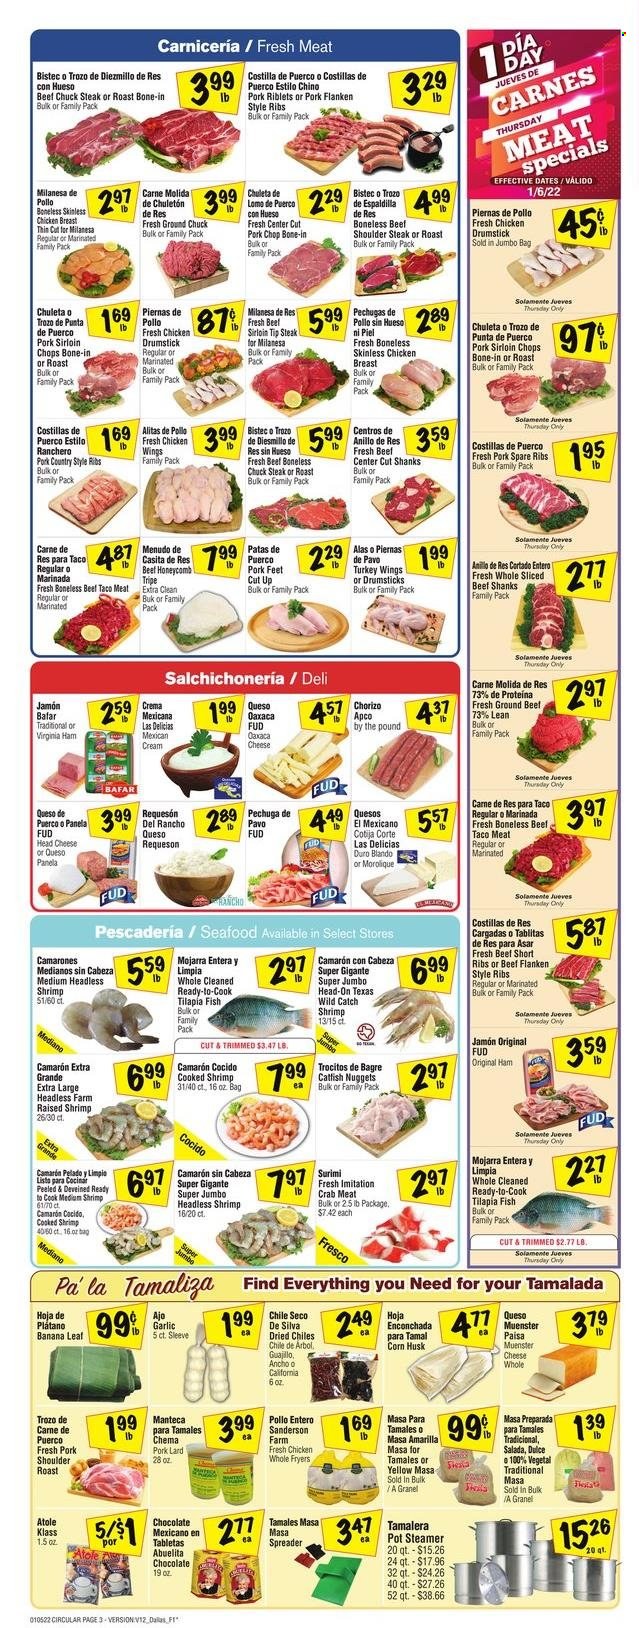 thumbnail - Fiesta Mart Flyer - 01/05/2022 - 01/11/2022 - Sales products - corn, garlic, catfish, crab meat, tilapia, seafood, crab, fish, shrimps, catfish nuggets, ham, chorizo, virginia ham, Münster cheese, lard, chocolate, Mexicano, hoja enconchada, whole chicken, chicken breasts, turkey wings, beef meat, beef ribs, ground beef, ground chuck, steak, chuck steak, pork chops, pork loin, pork meat, pork ribs, pork roast, pork shoulder, pork spare ribs, country style ribs, spreader. Page 3.